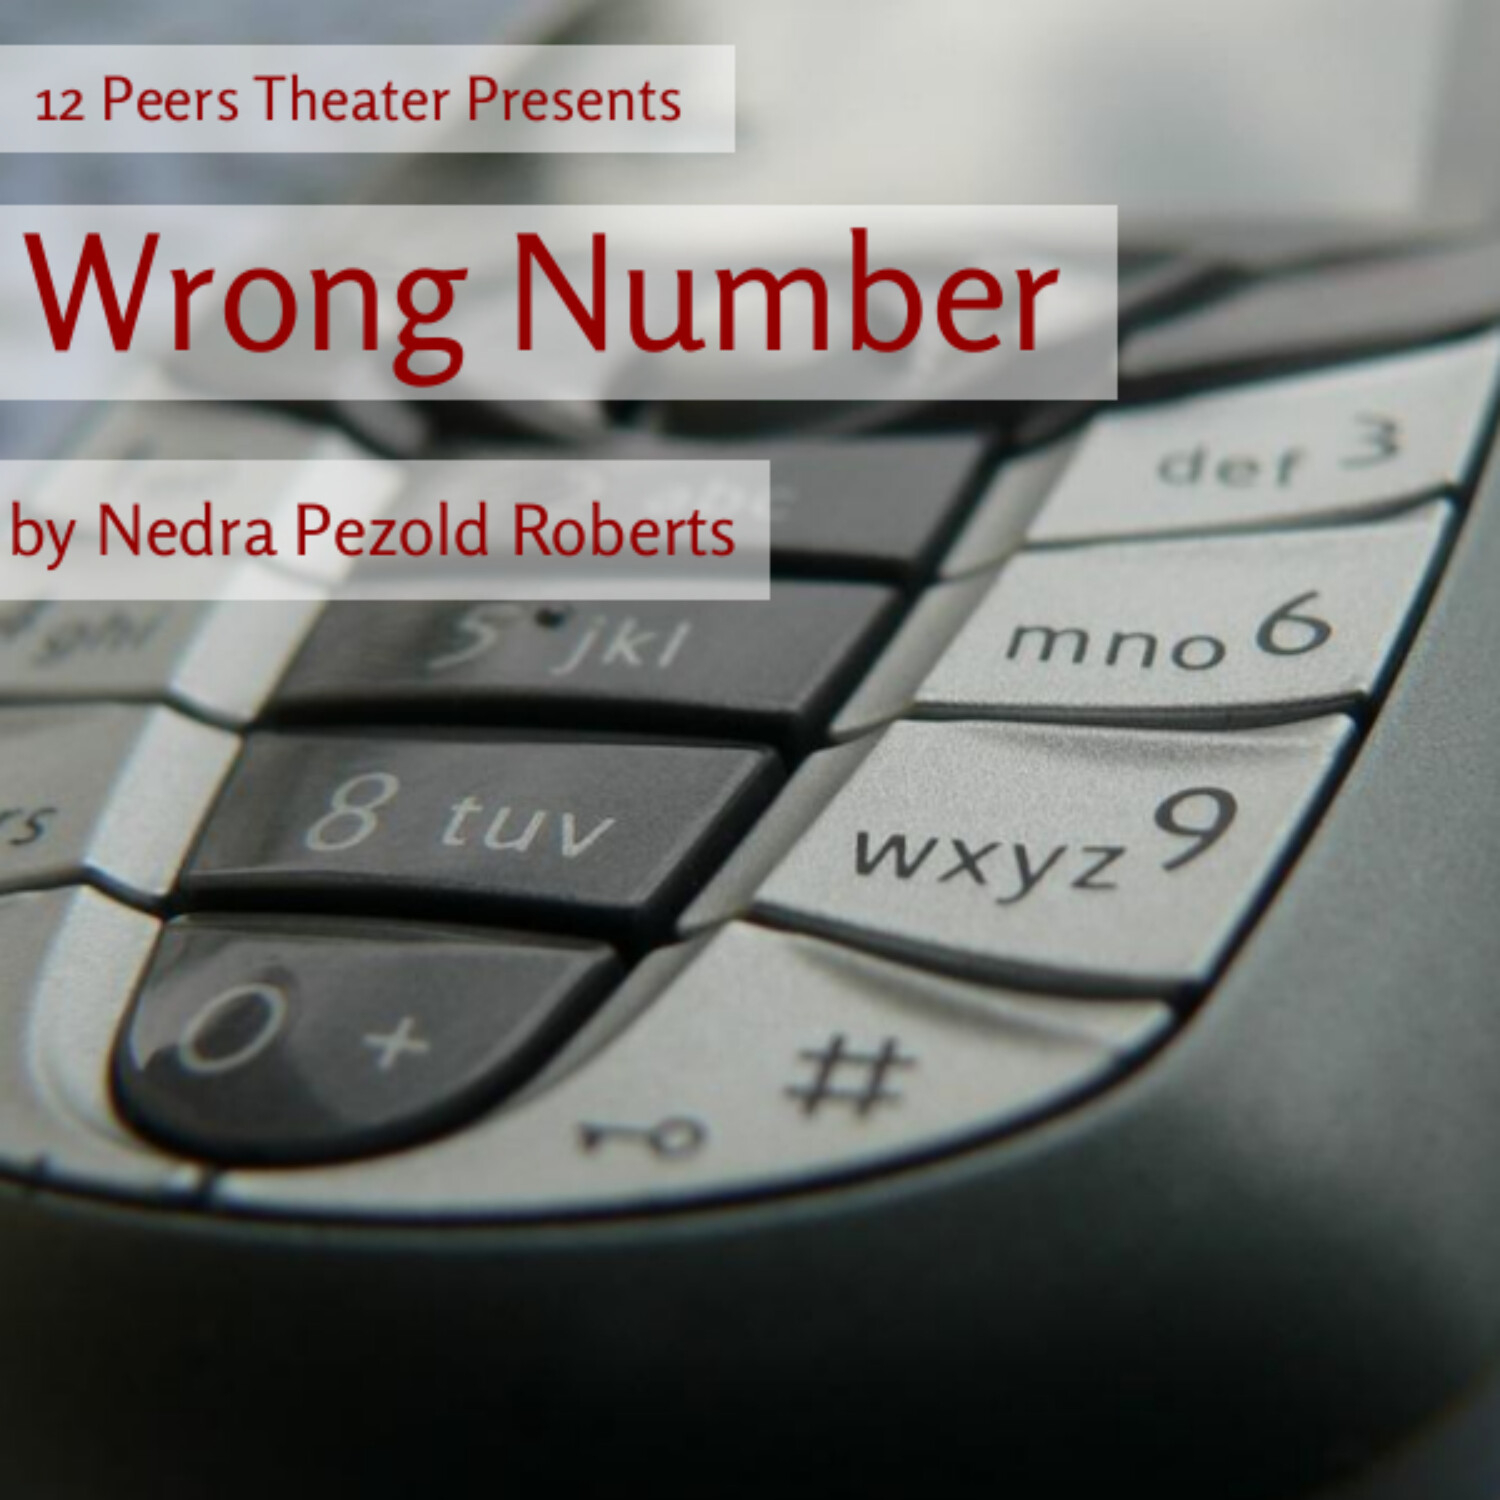 Episode 21 - Wrong Number by Nedra Pezold Roberts